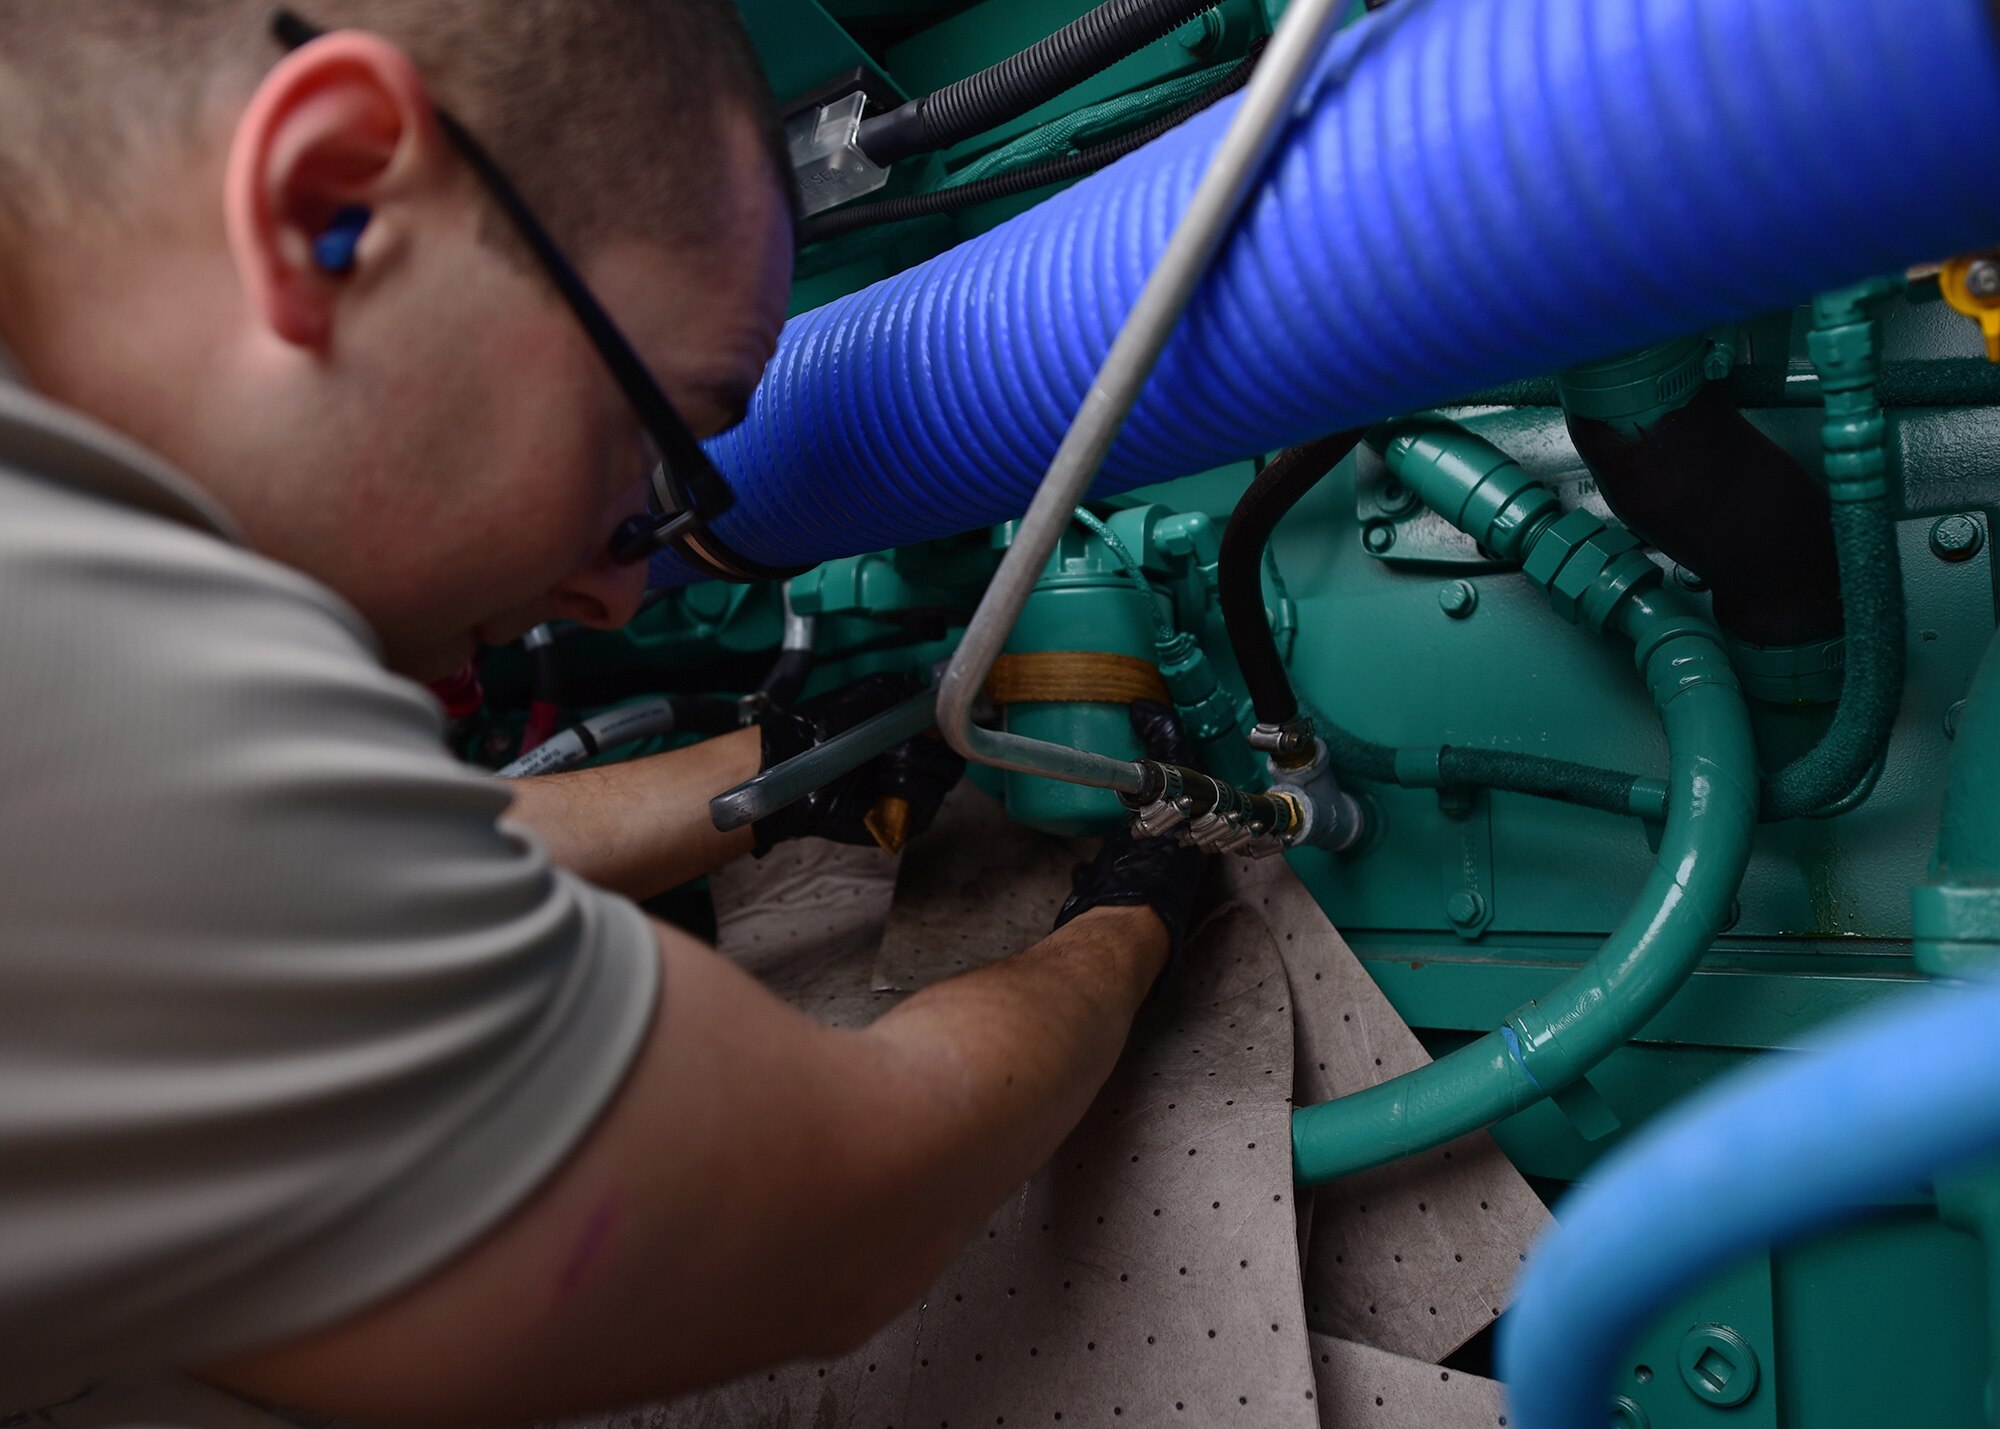 Staff Sgt. Joshua R. Olando, an electrical power production craftsman supporting the 325th Civil Engineer Squadron, uses an oil filter strap wrench to remove filters on a BPU 800 kilowatt high-voltage generator Nov. 30, 2018, at Tyndall Air Force Base, Fla. Bases from around the country sent Airmen and assets to aid in clean up and reconstruction after Hurricane Michael ravaged Tyndall Air Force Base. Olando is currently deployed from the 436th Civil Engineer Squadron at Dover Air Force Base, Del. (U.S. Air Force photo by Senior Airman Isaiah J. Soliz) Maintenance